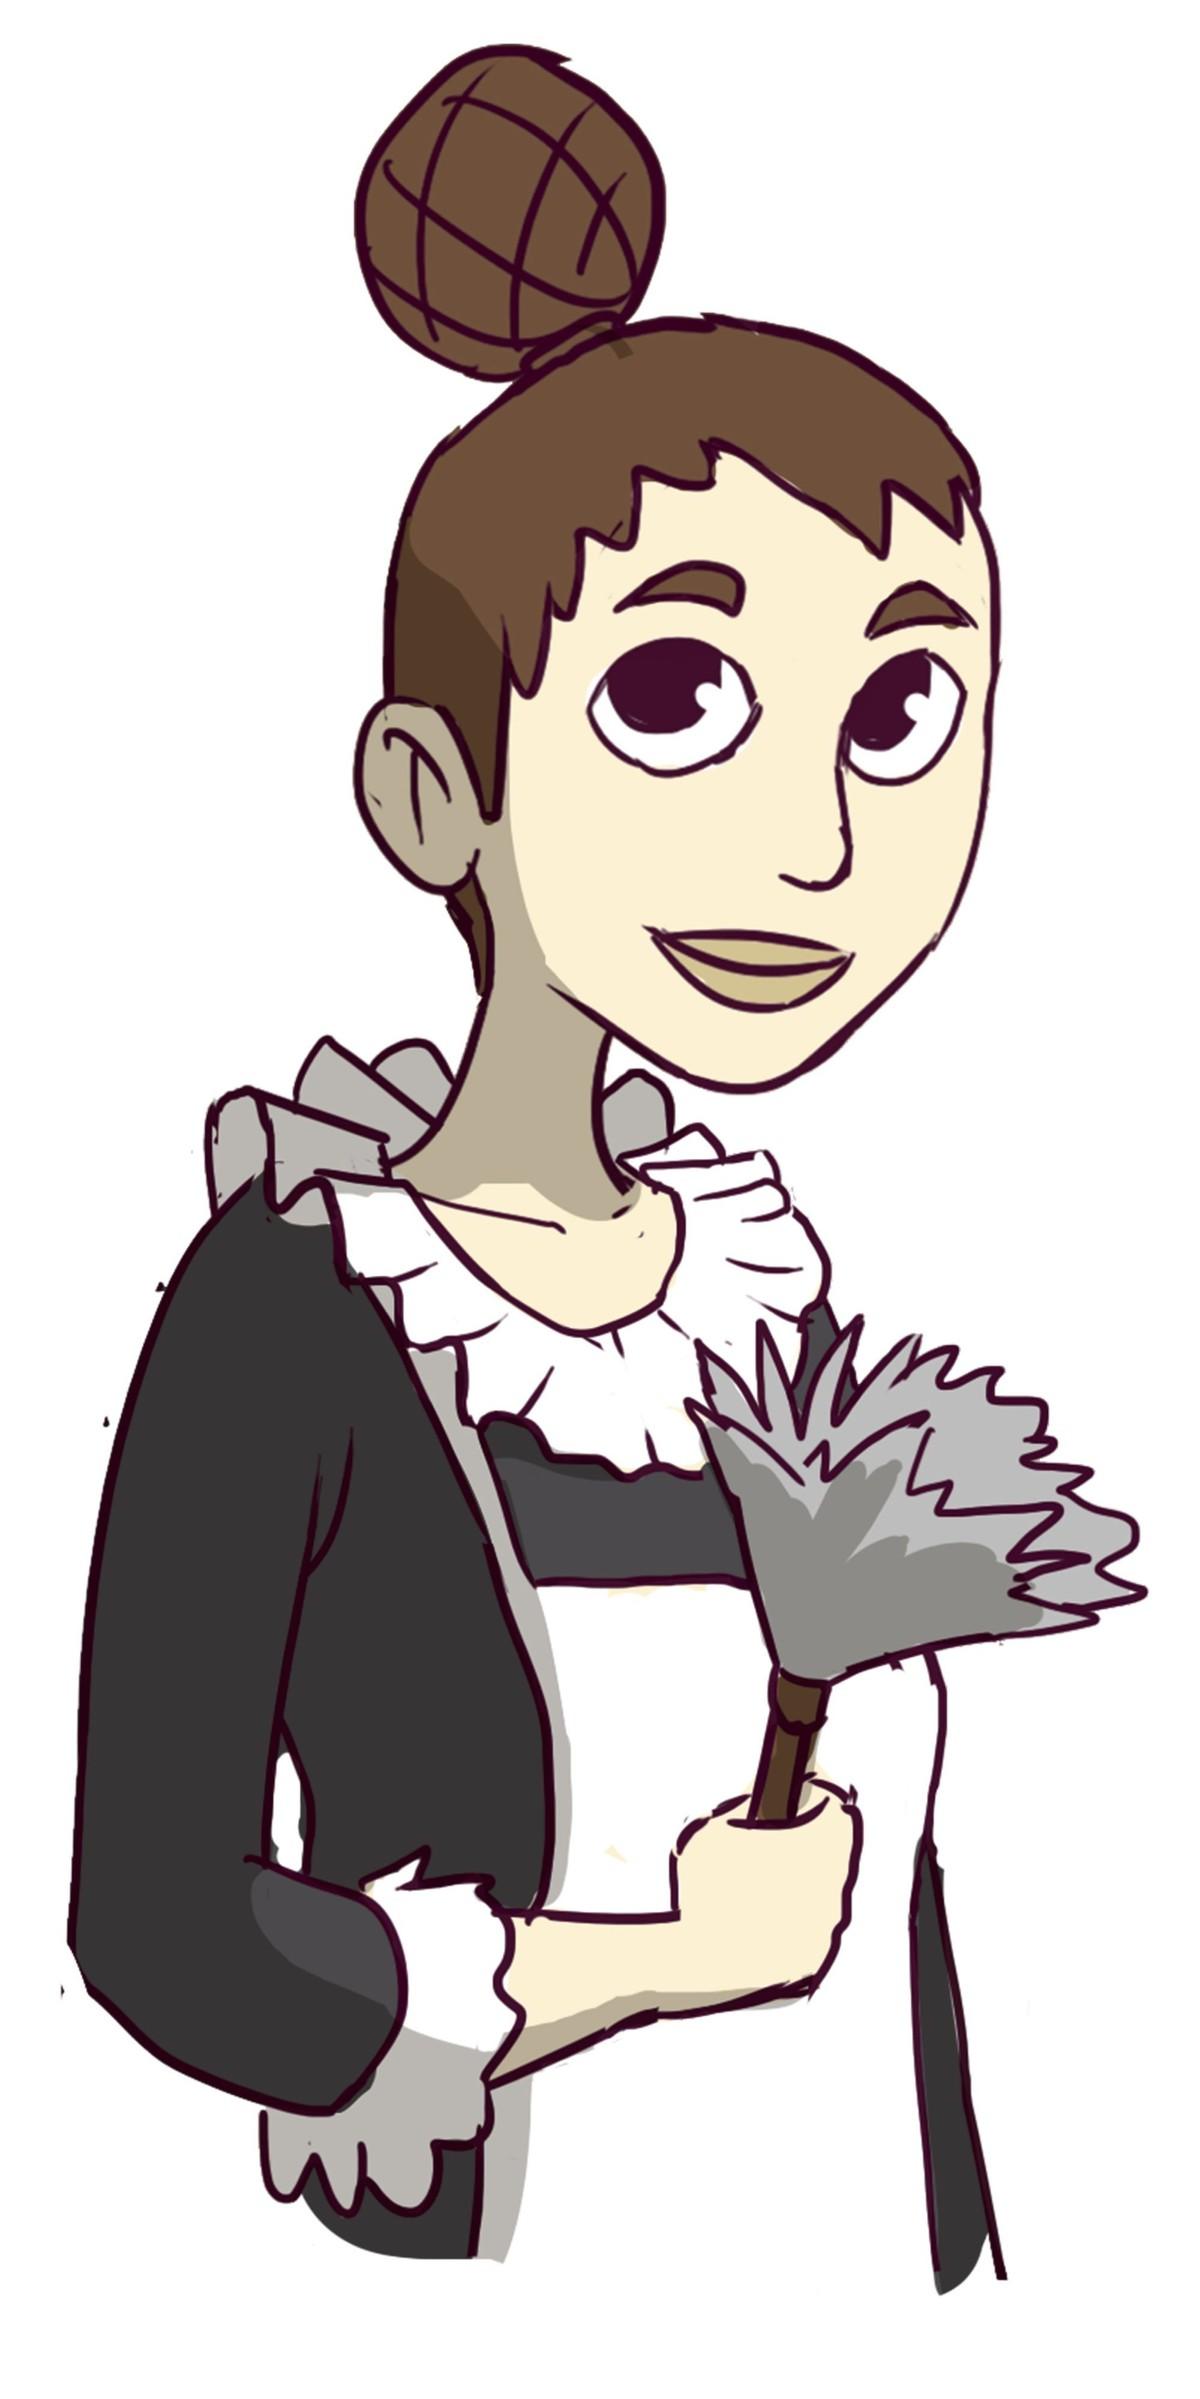 A maid with brown hair